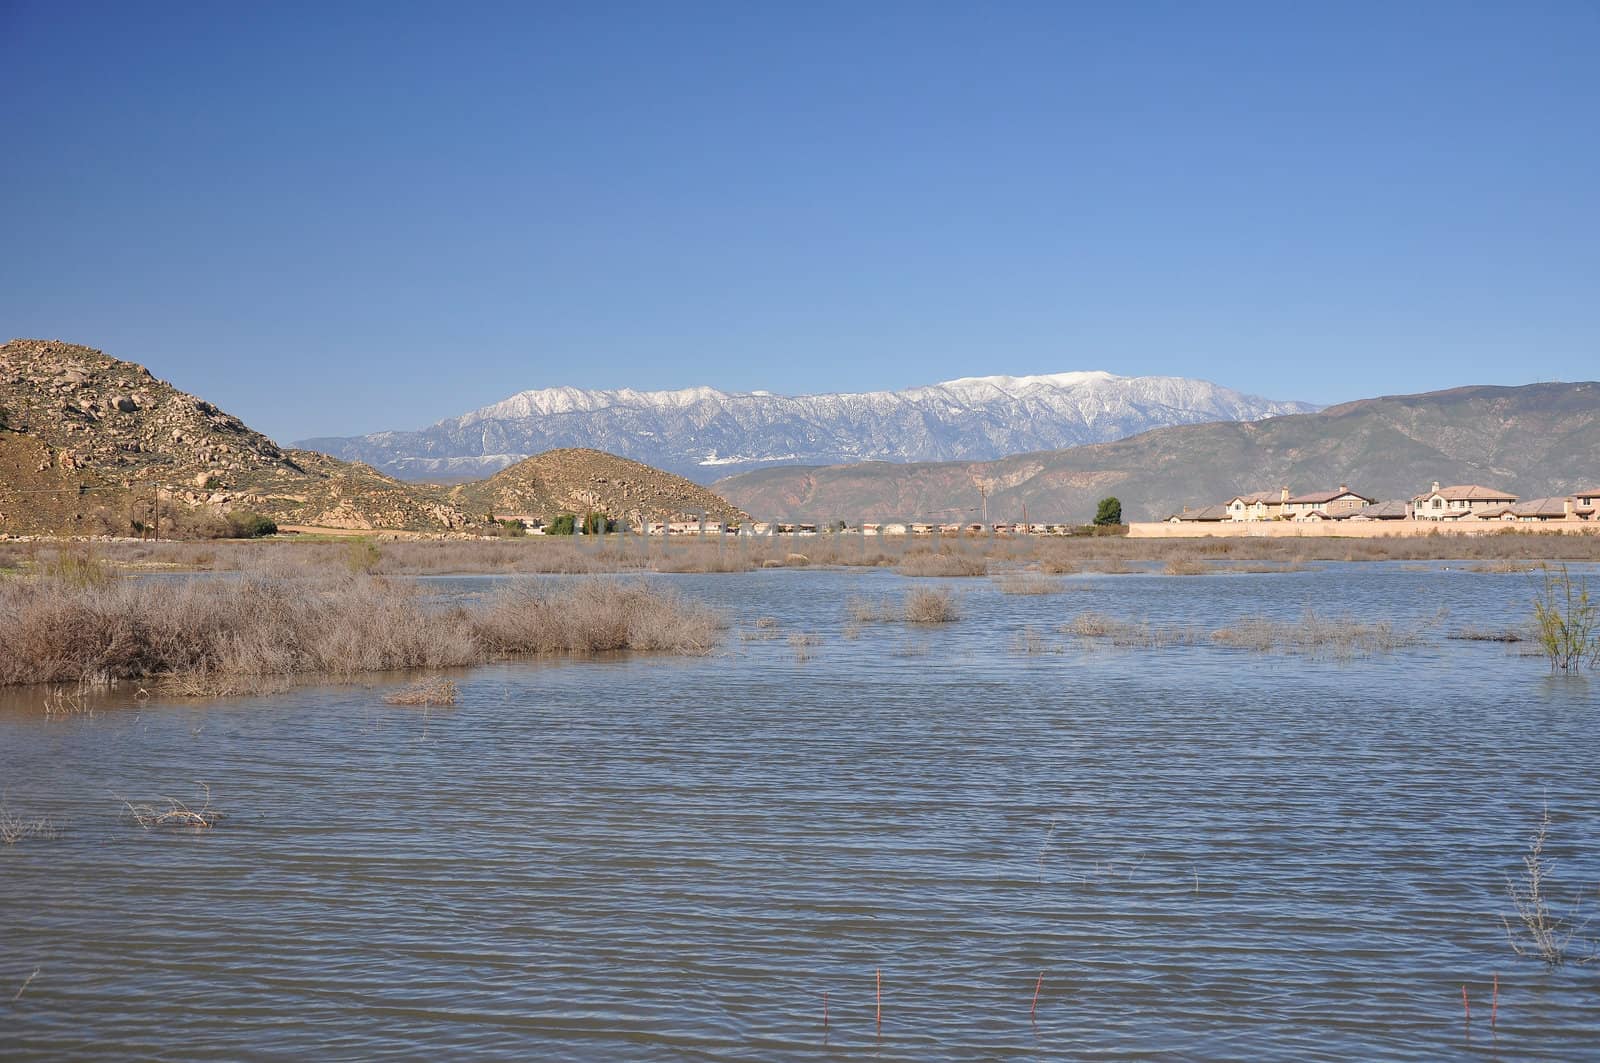 Snow-capped Mount San Gorgonio is seen in the distance beyond this pond in Hemet, California.